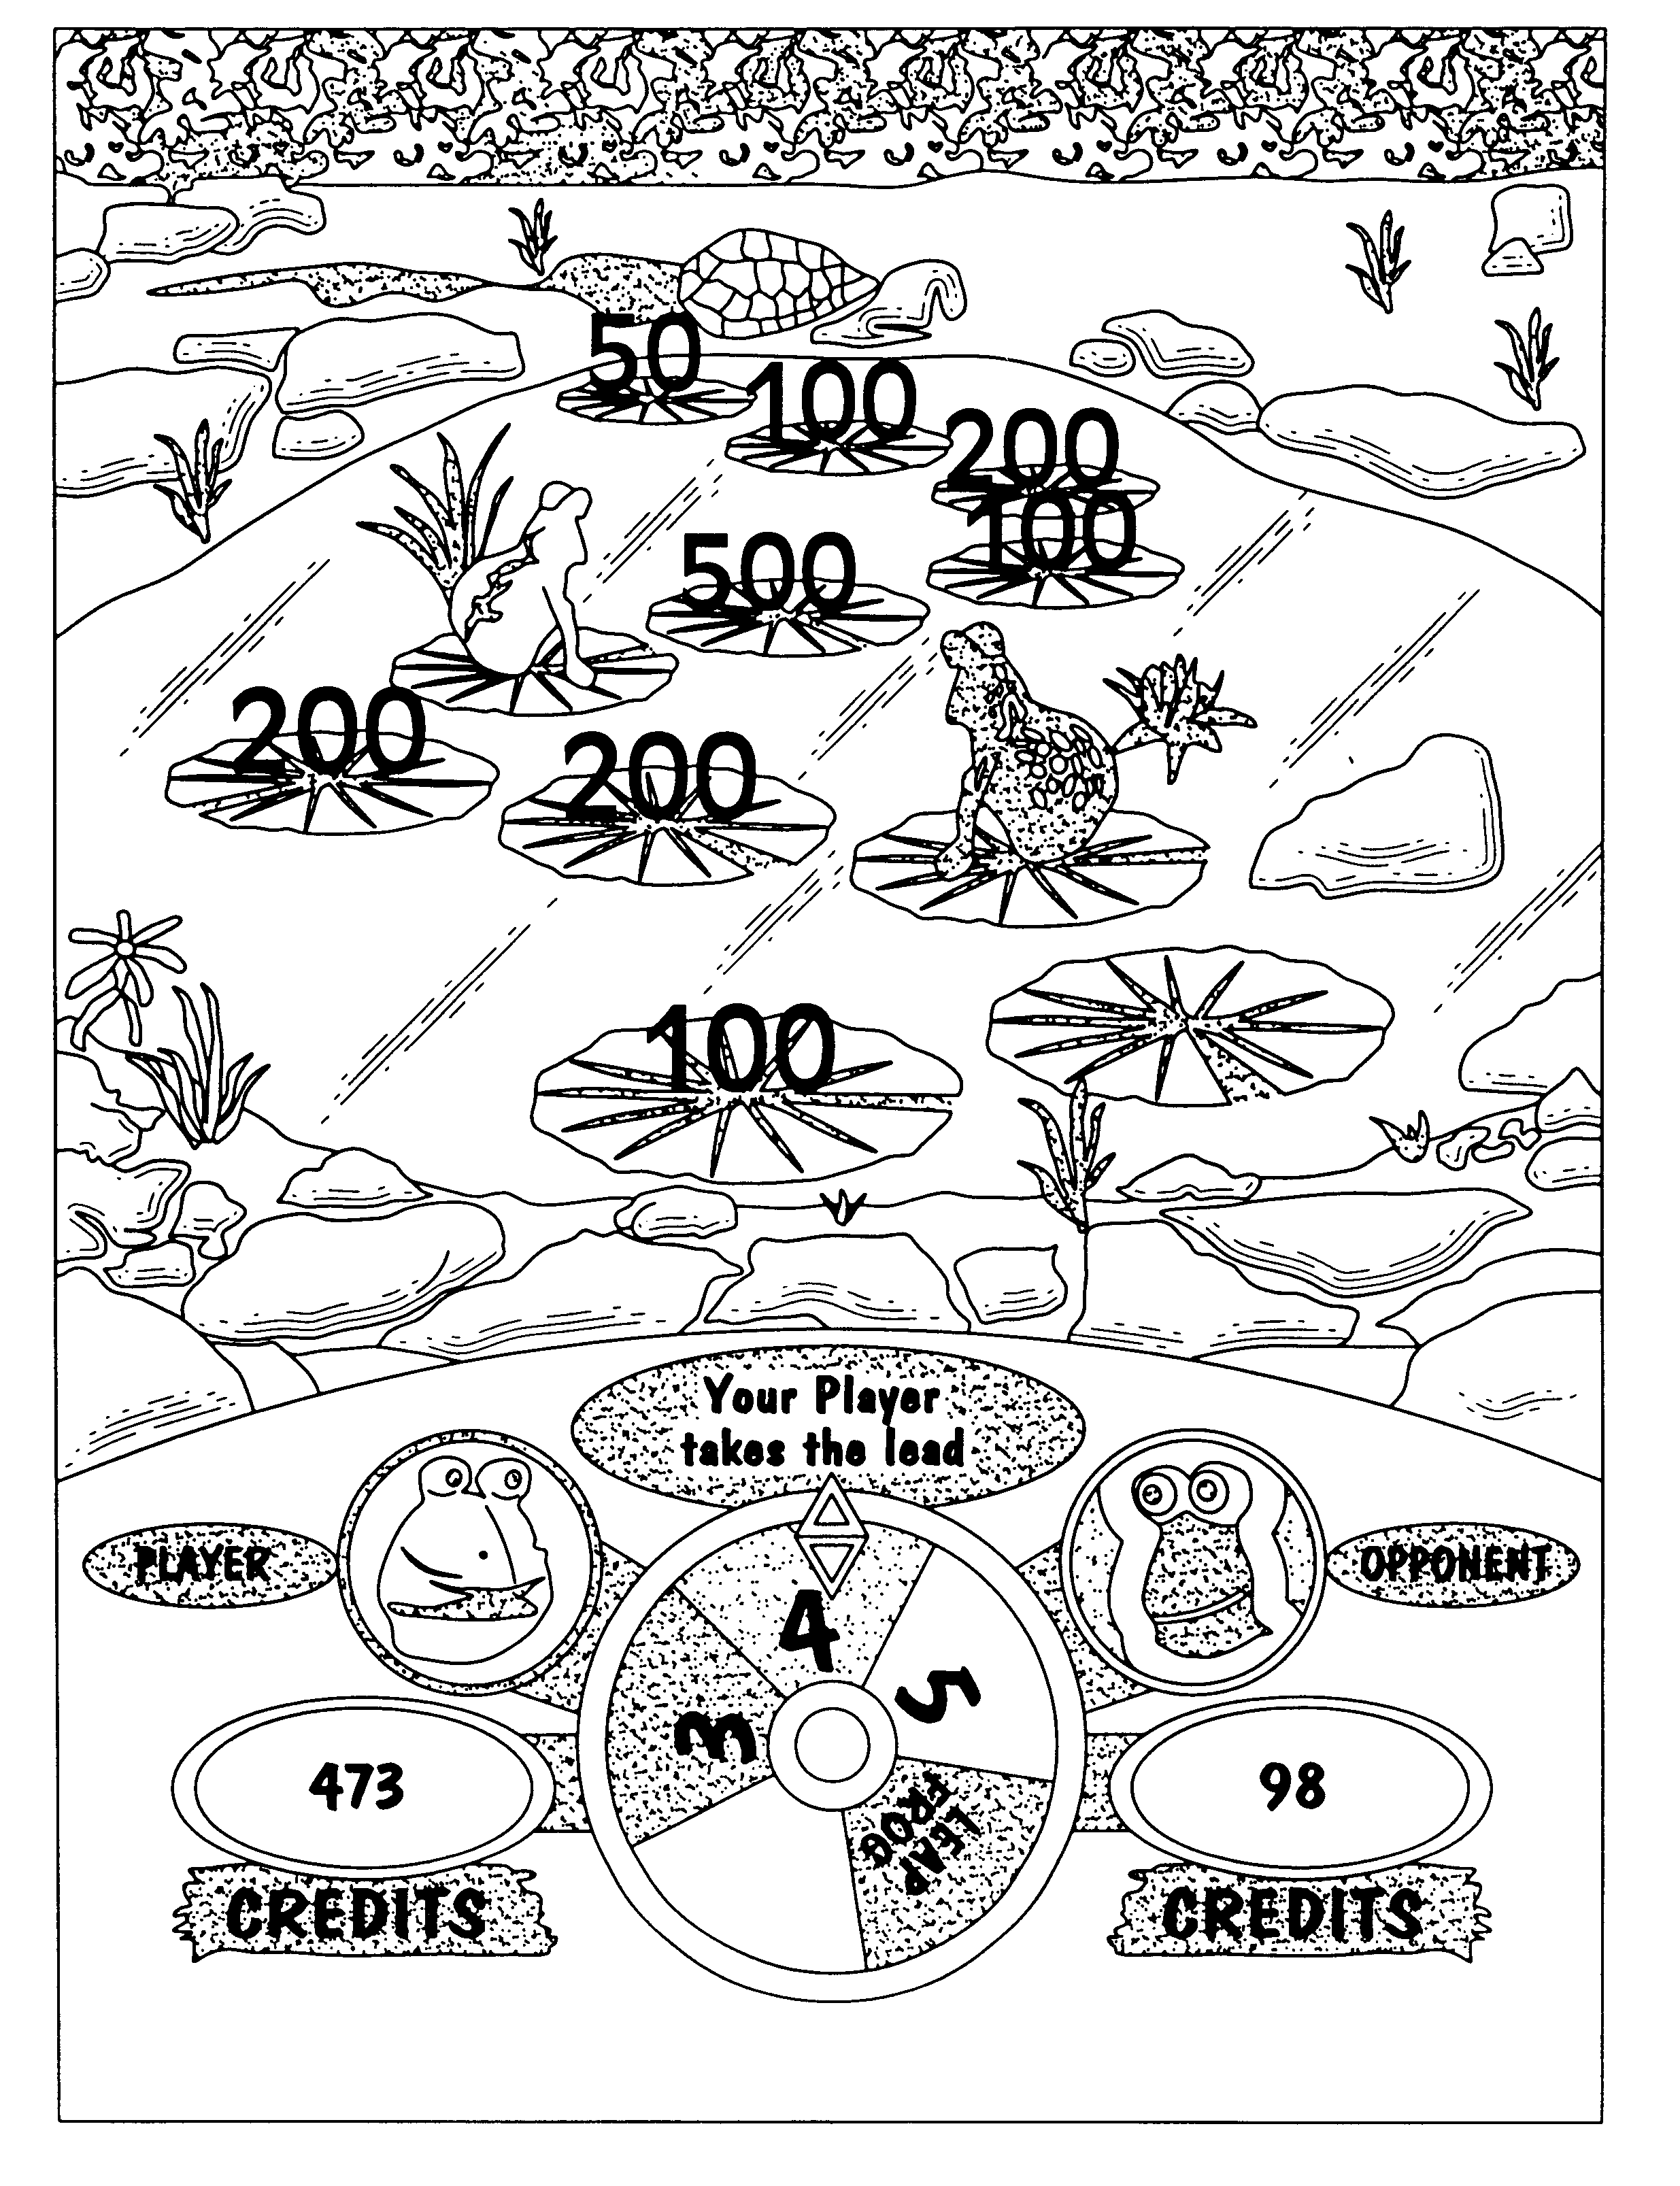 Gaming device and method having an internally-based competition-type bonus event